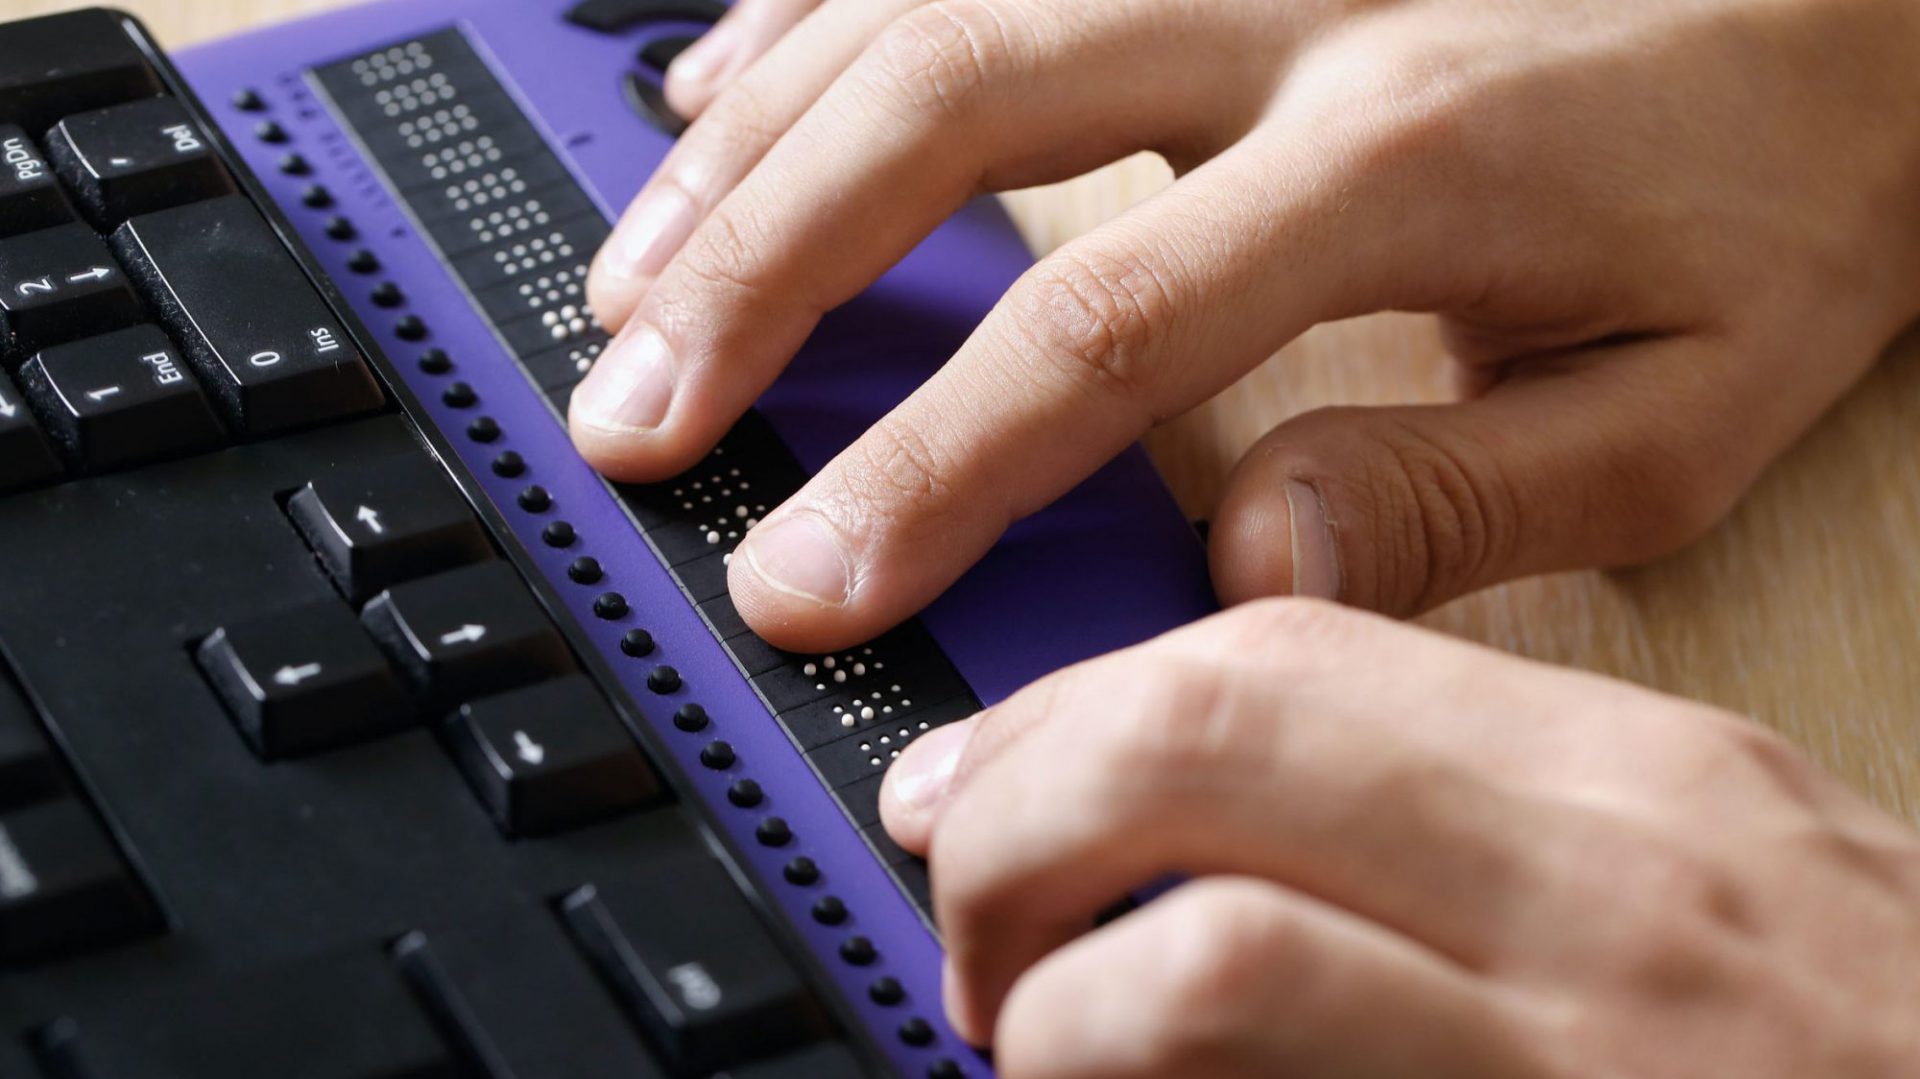 Blind person using computer with braille computer display and a computer keyboard, all compatible with EnhancedBallot.